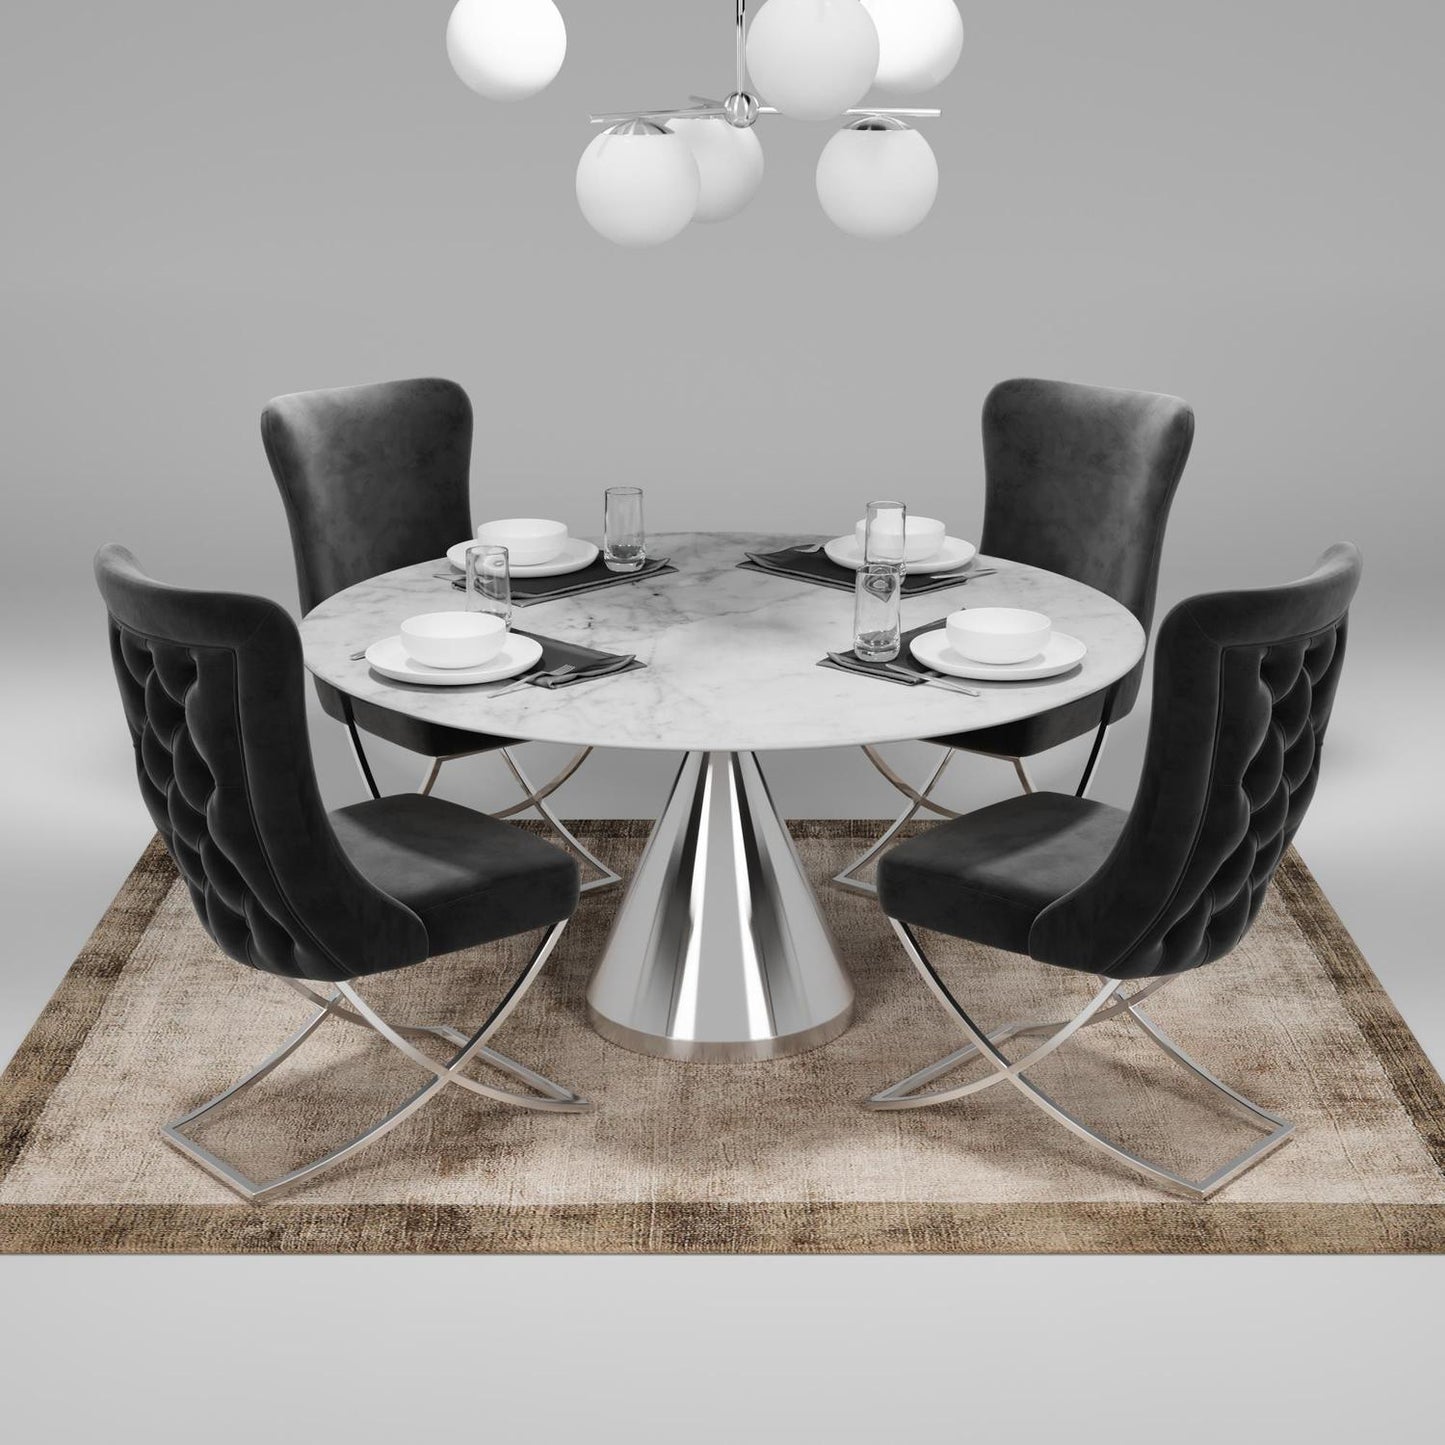 Sultan Collection Wing Back, Modern design, upholstered dining chair in Charcoal Gray with Silver Metal legs in a dining room with set of four chairs around a round table.